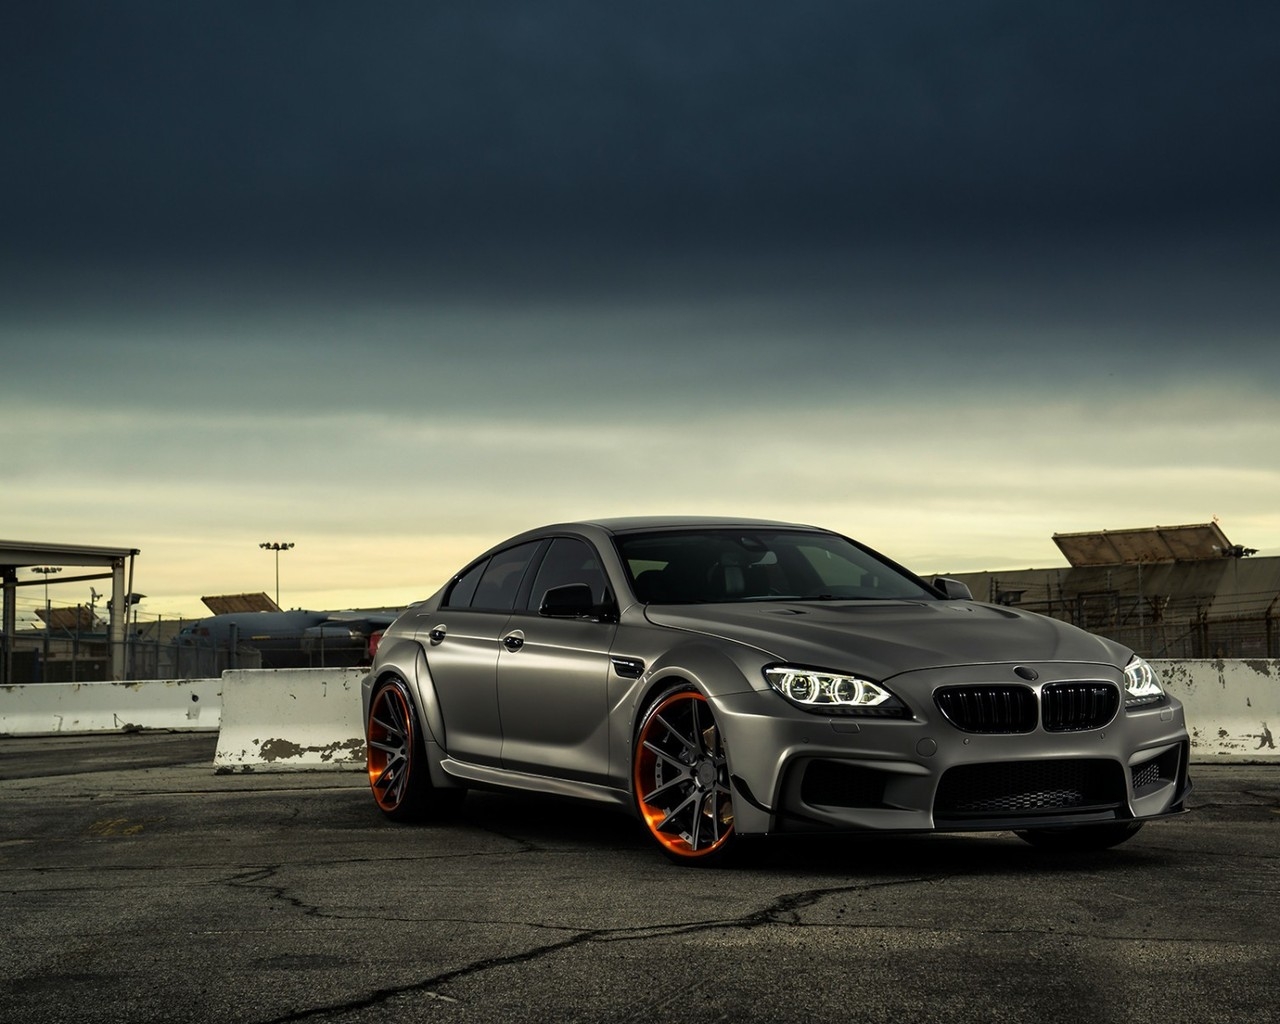 Gorgeous BMW M6 for 1280 x 1024 resolution